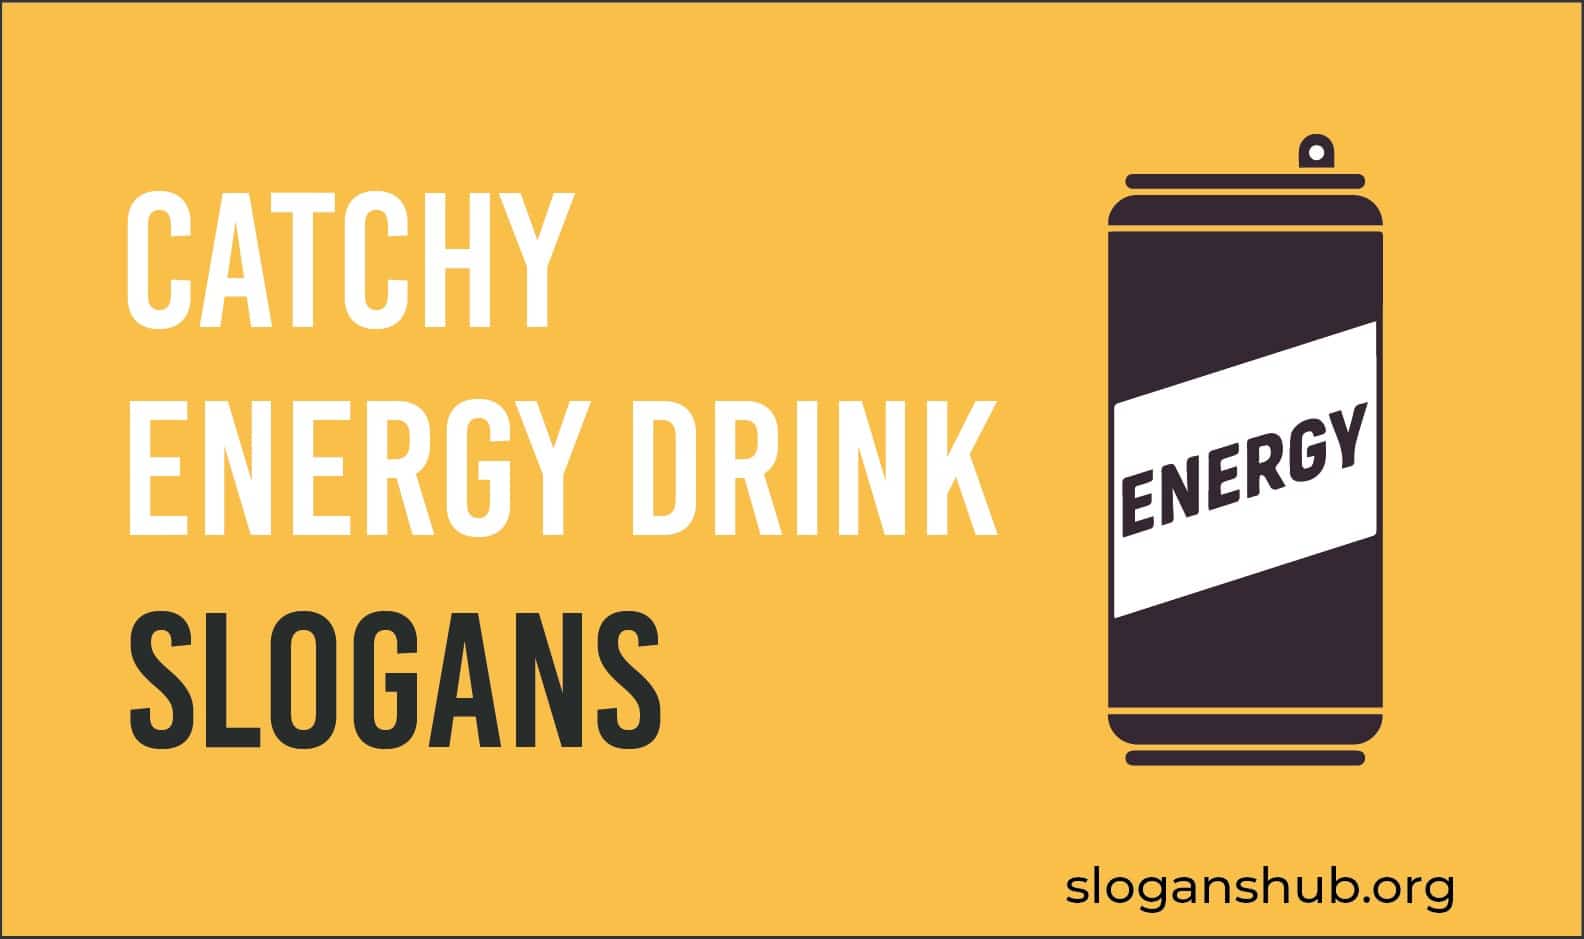 Catchy Energy Drink Slogans And Taglines Slogans Hub CLOOBX HOT GIRL